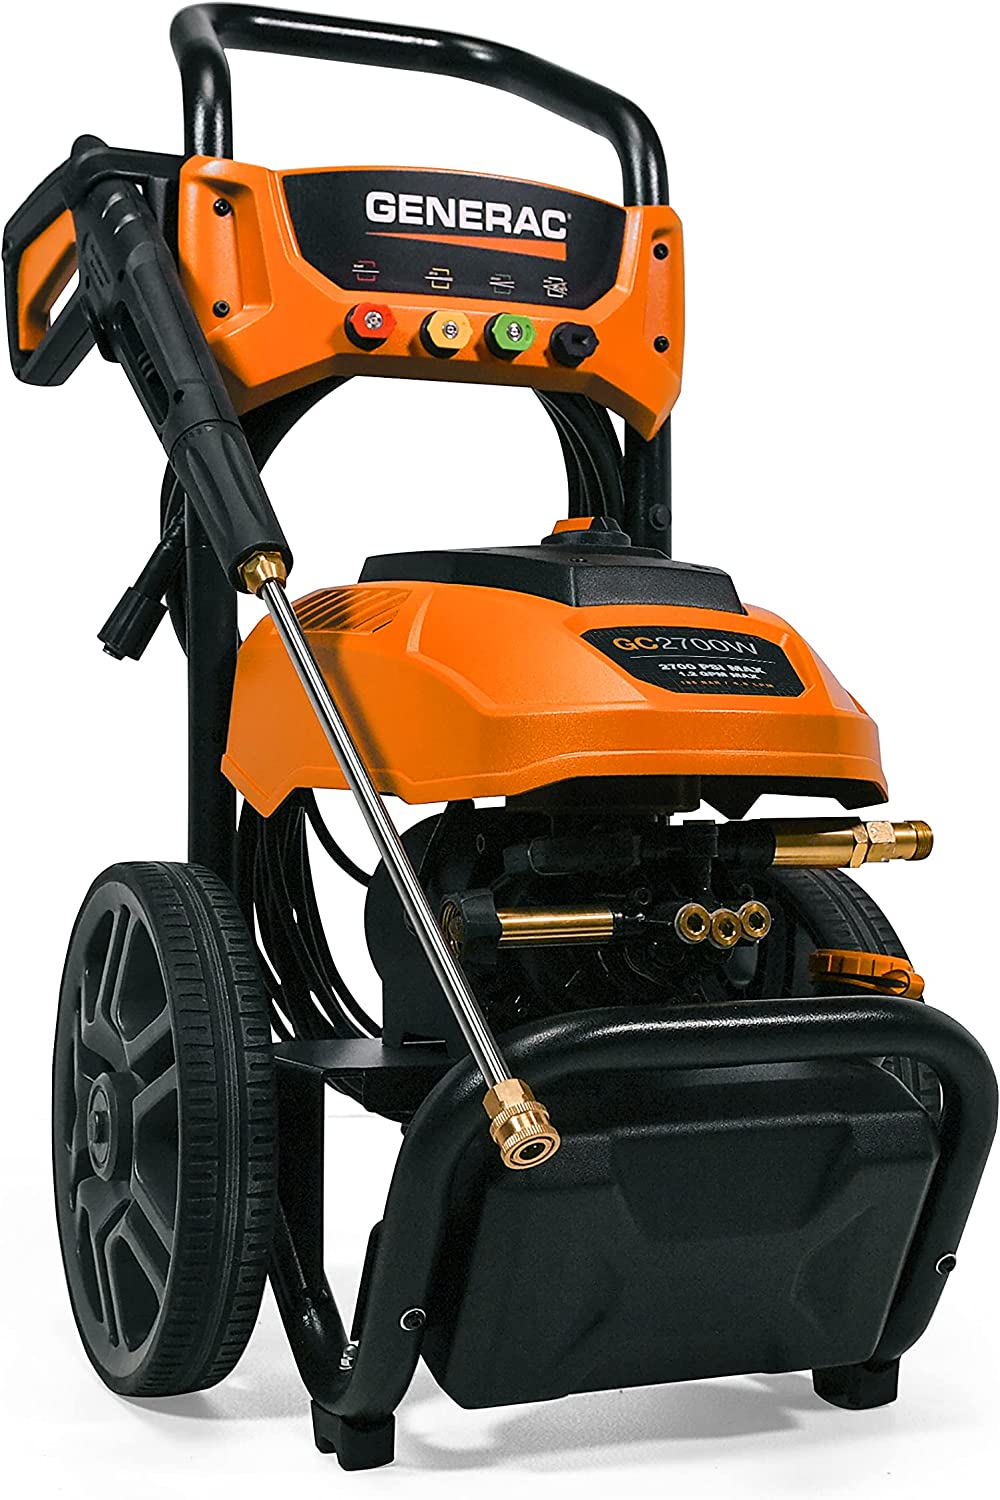 Generac 8888 2700 PSI 1.2 GPM Electric-Powered Residential Pressure Washer, 50-StateCARB Compliant